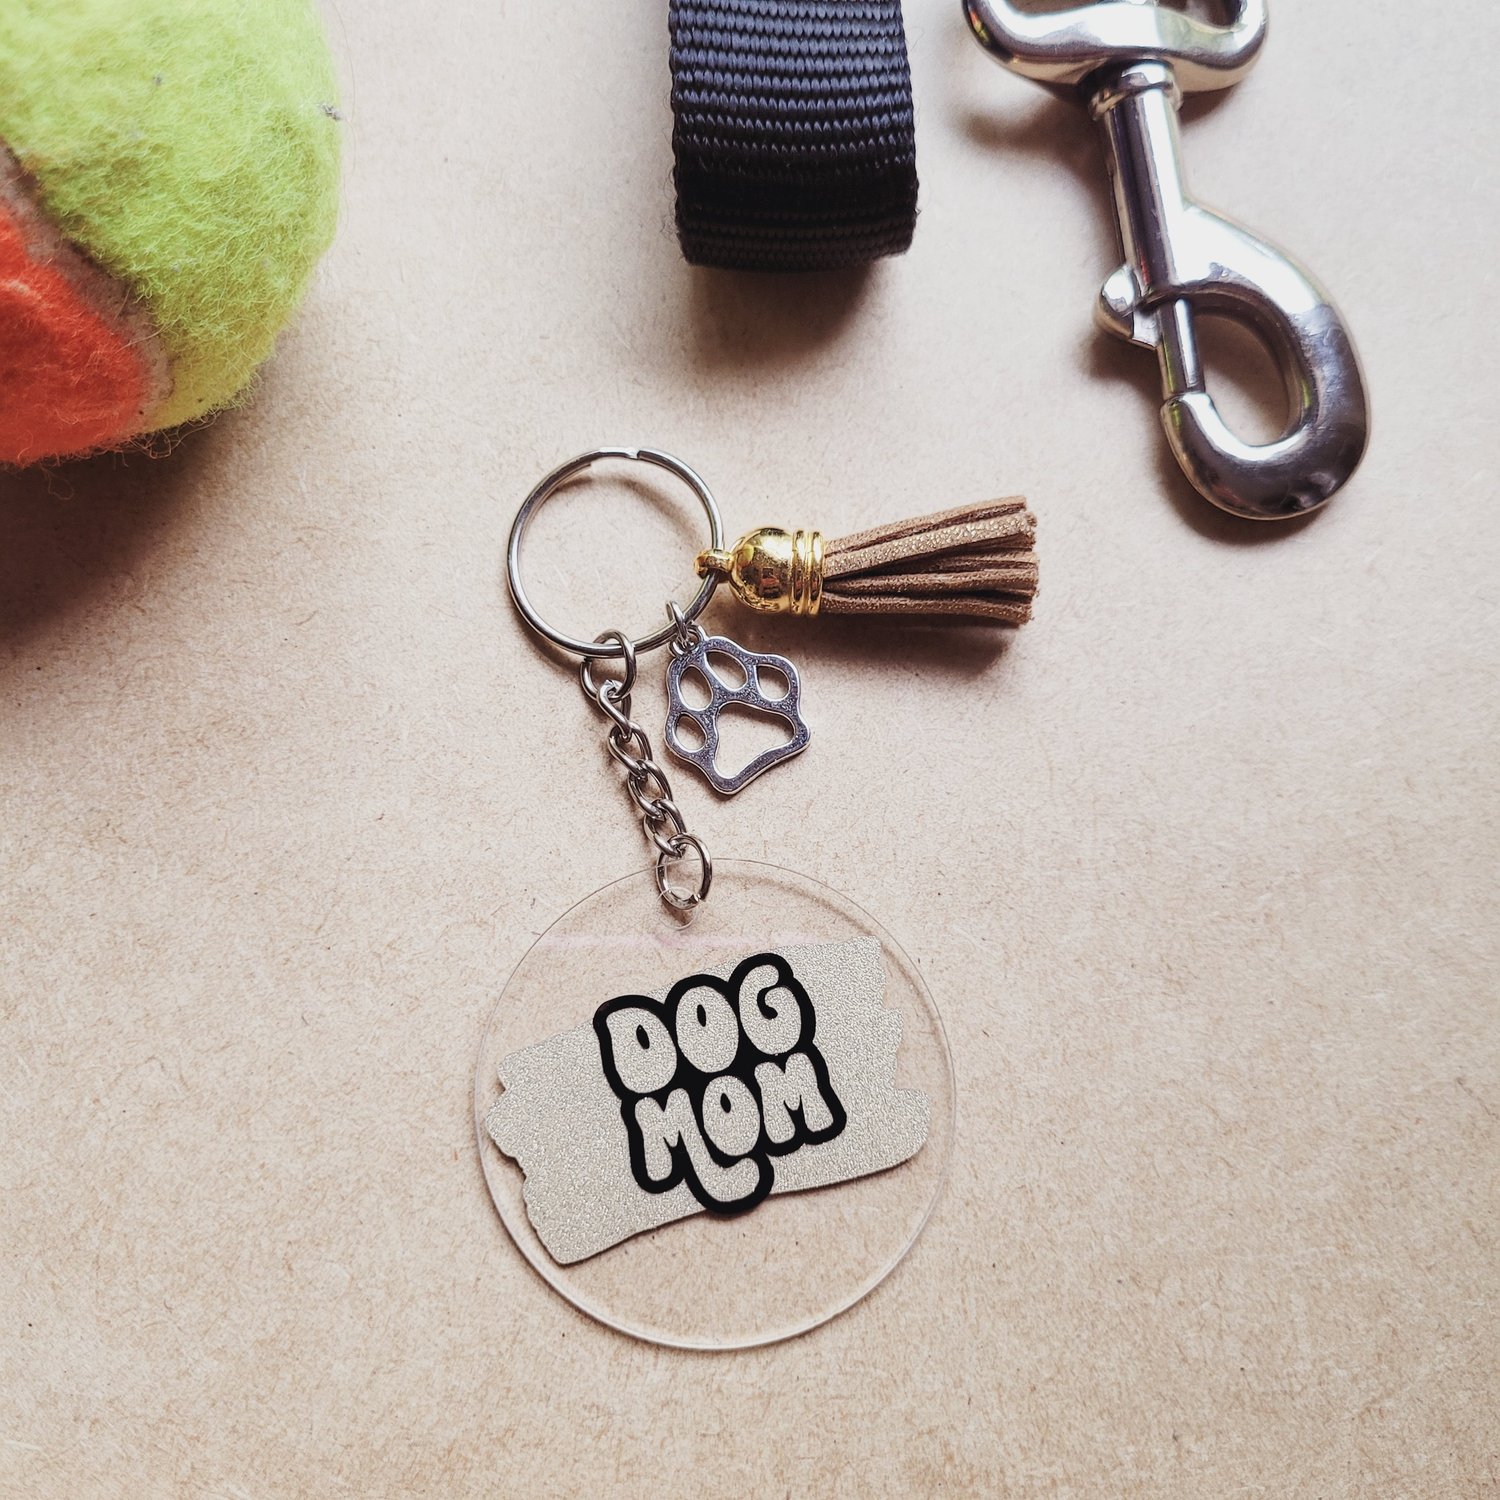 Image of Dog Mom Keychains with Tassel and Charm